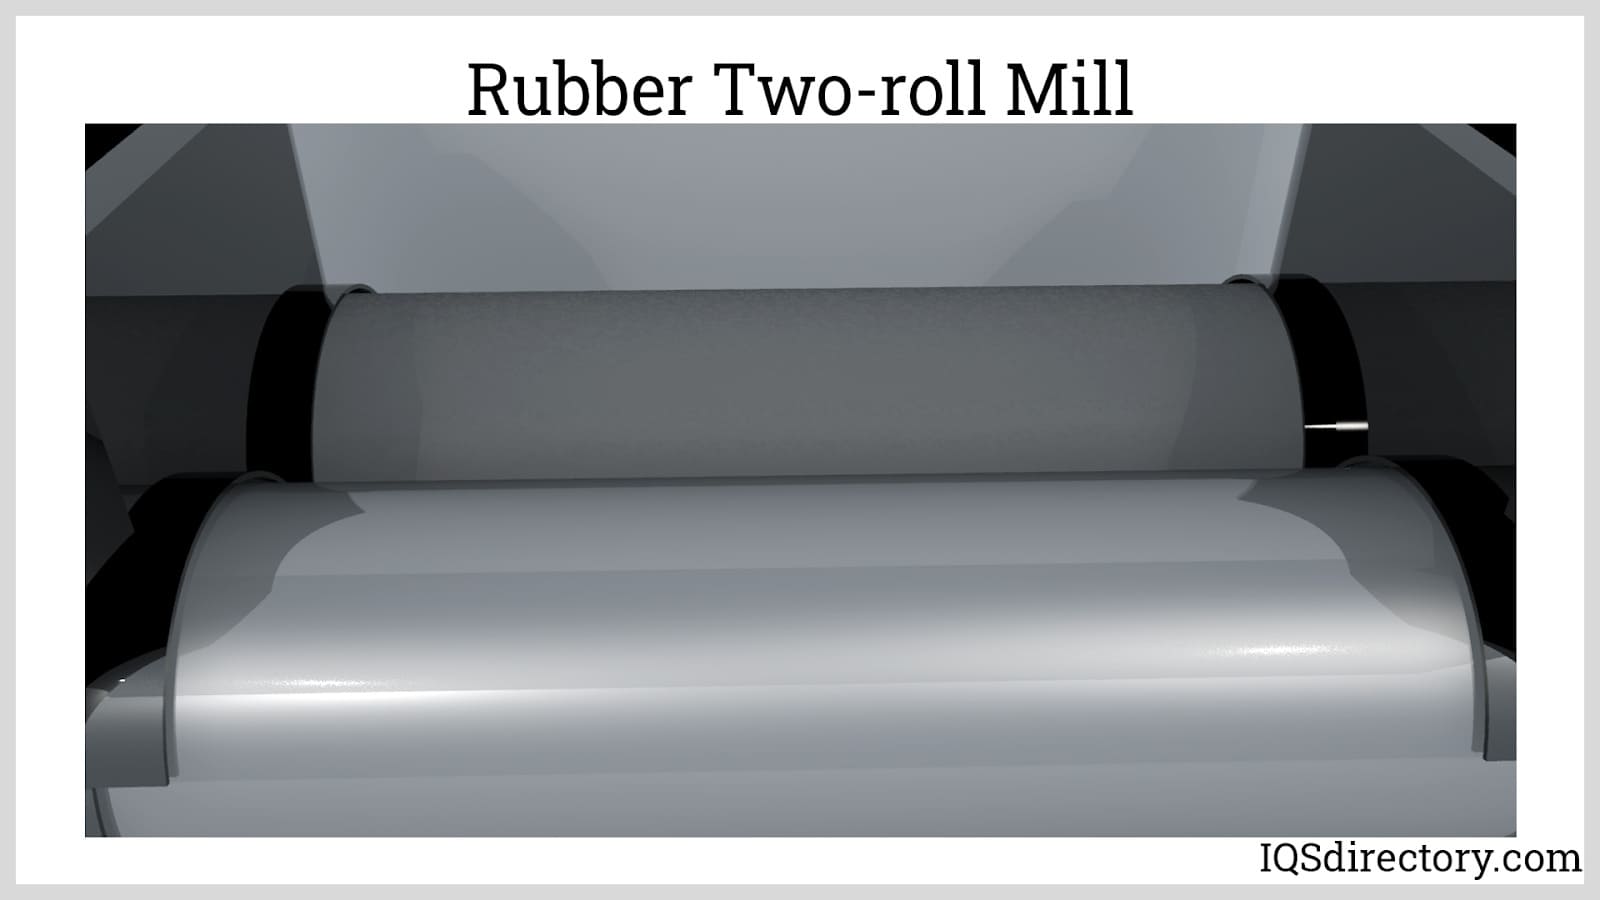 Rubber Two-roll Mill